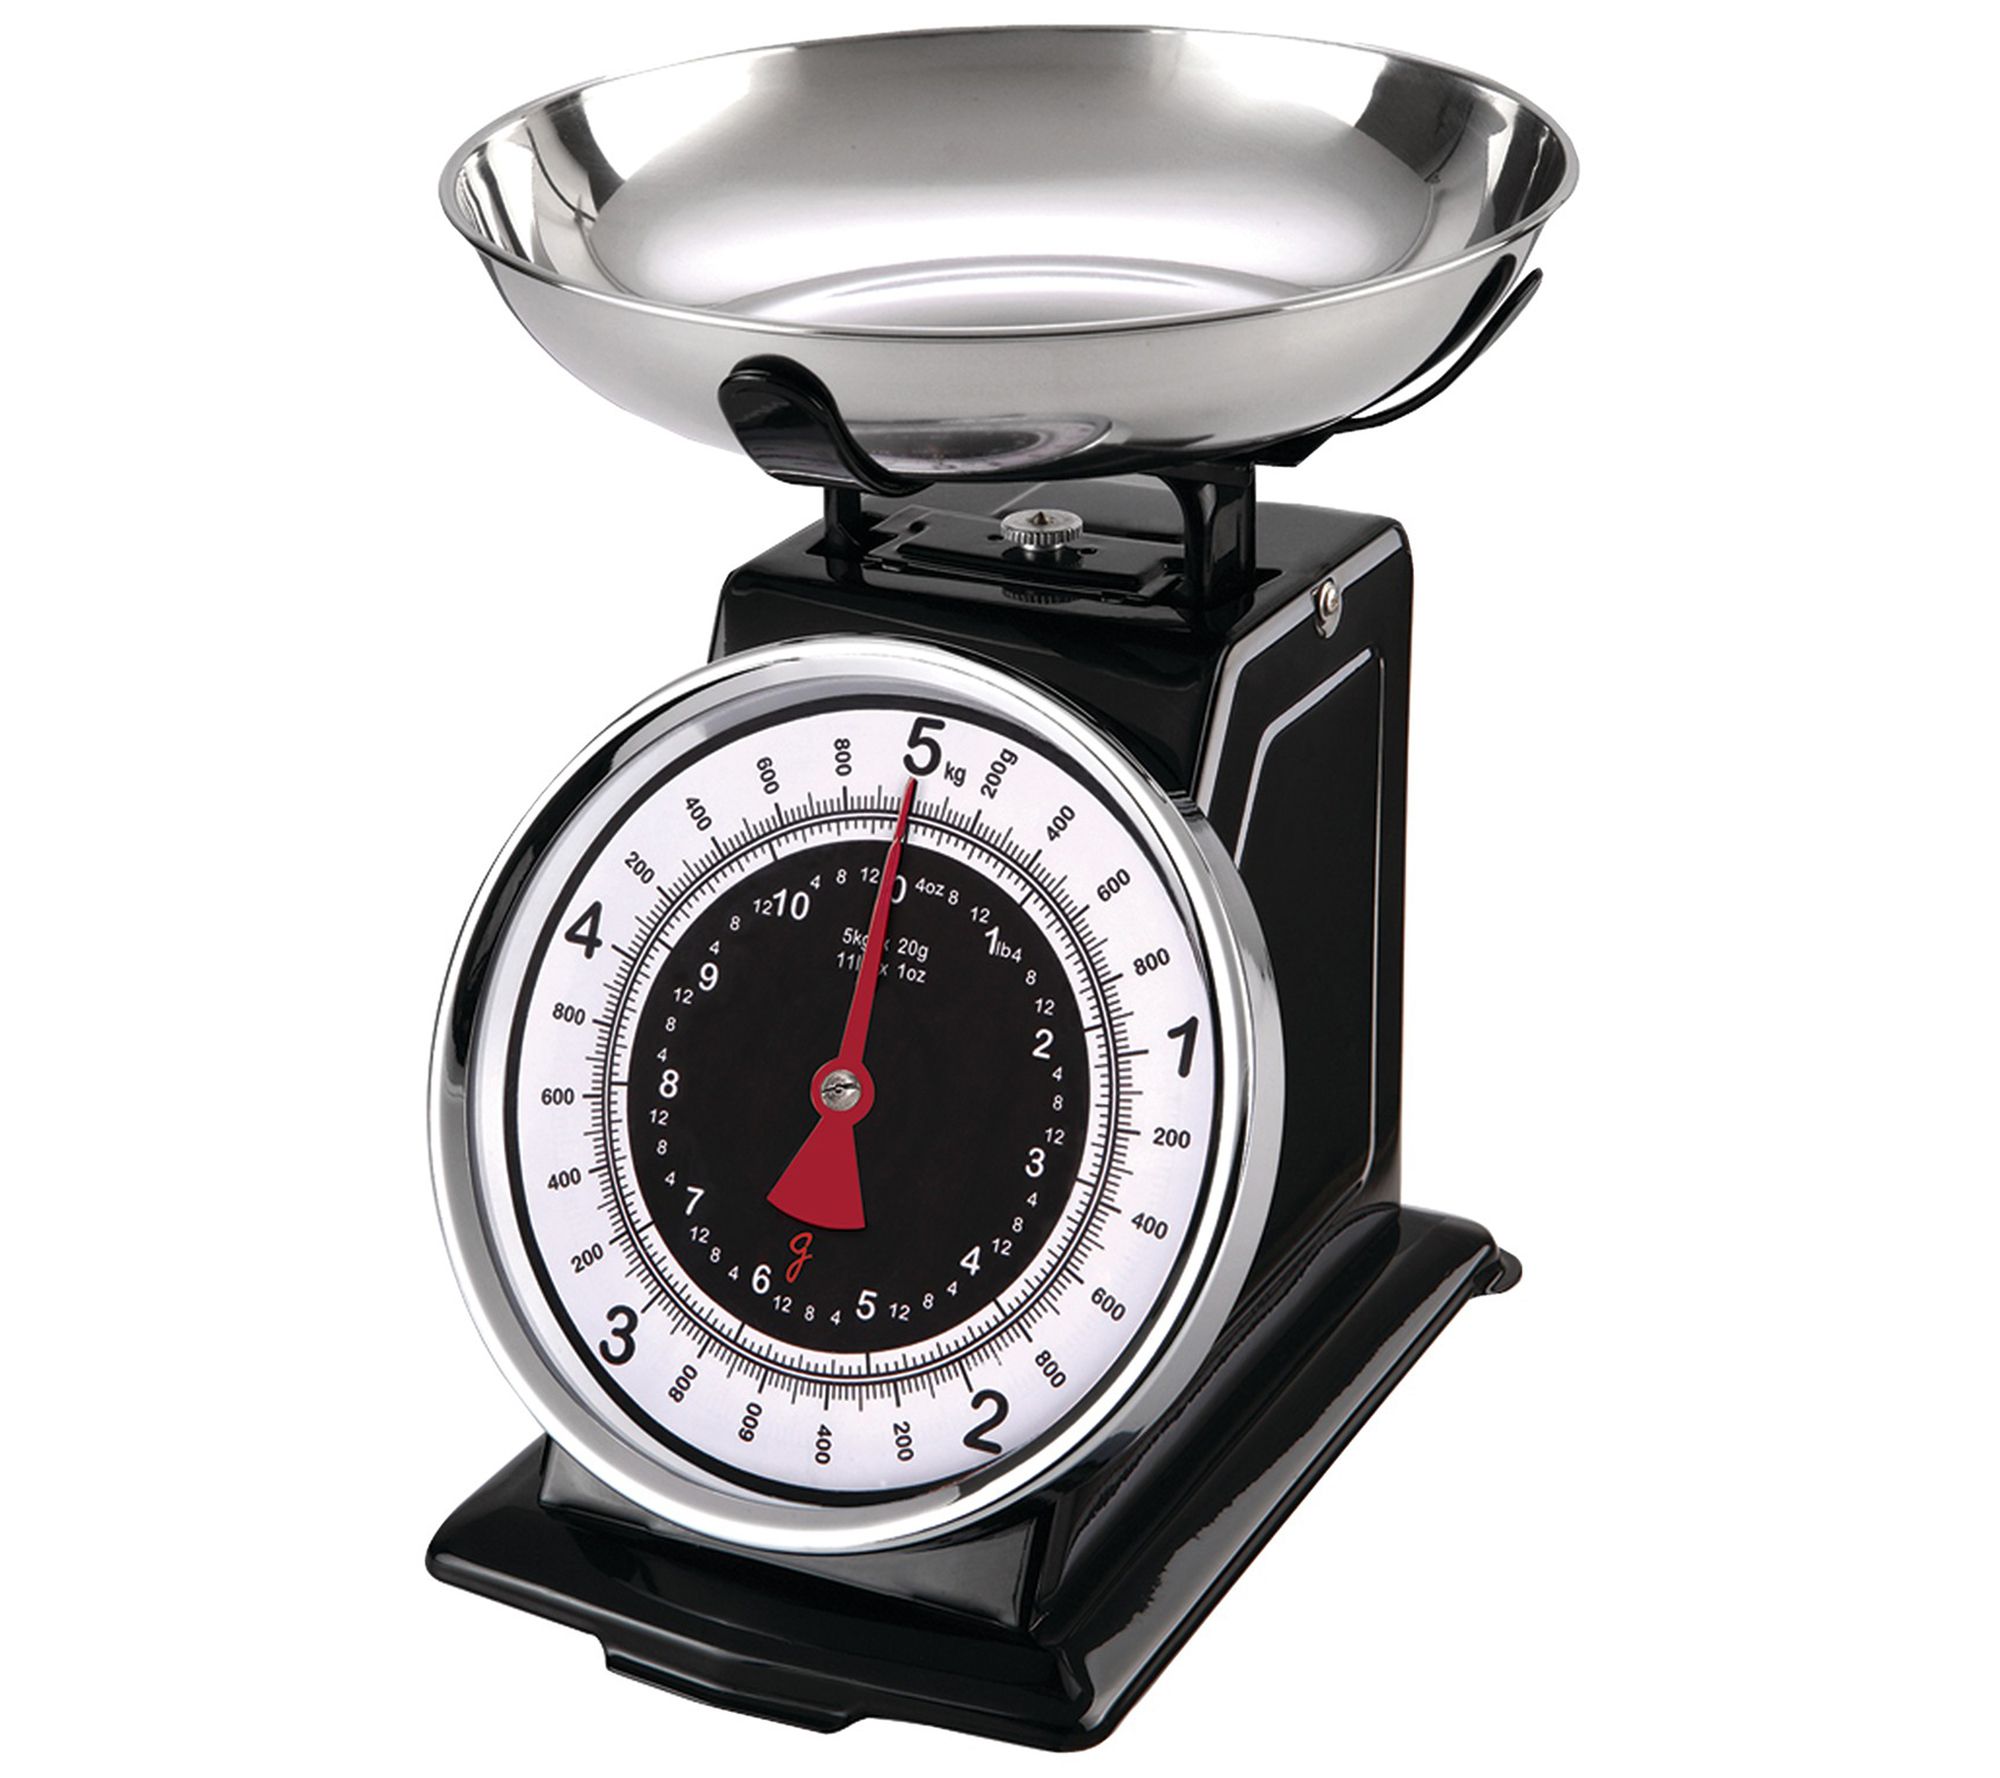 Taylor Precision Products Mechanical Kitchen Weighing Food Scale Weigh